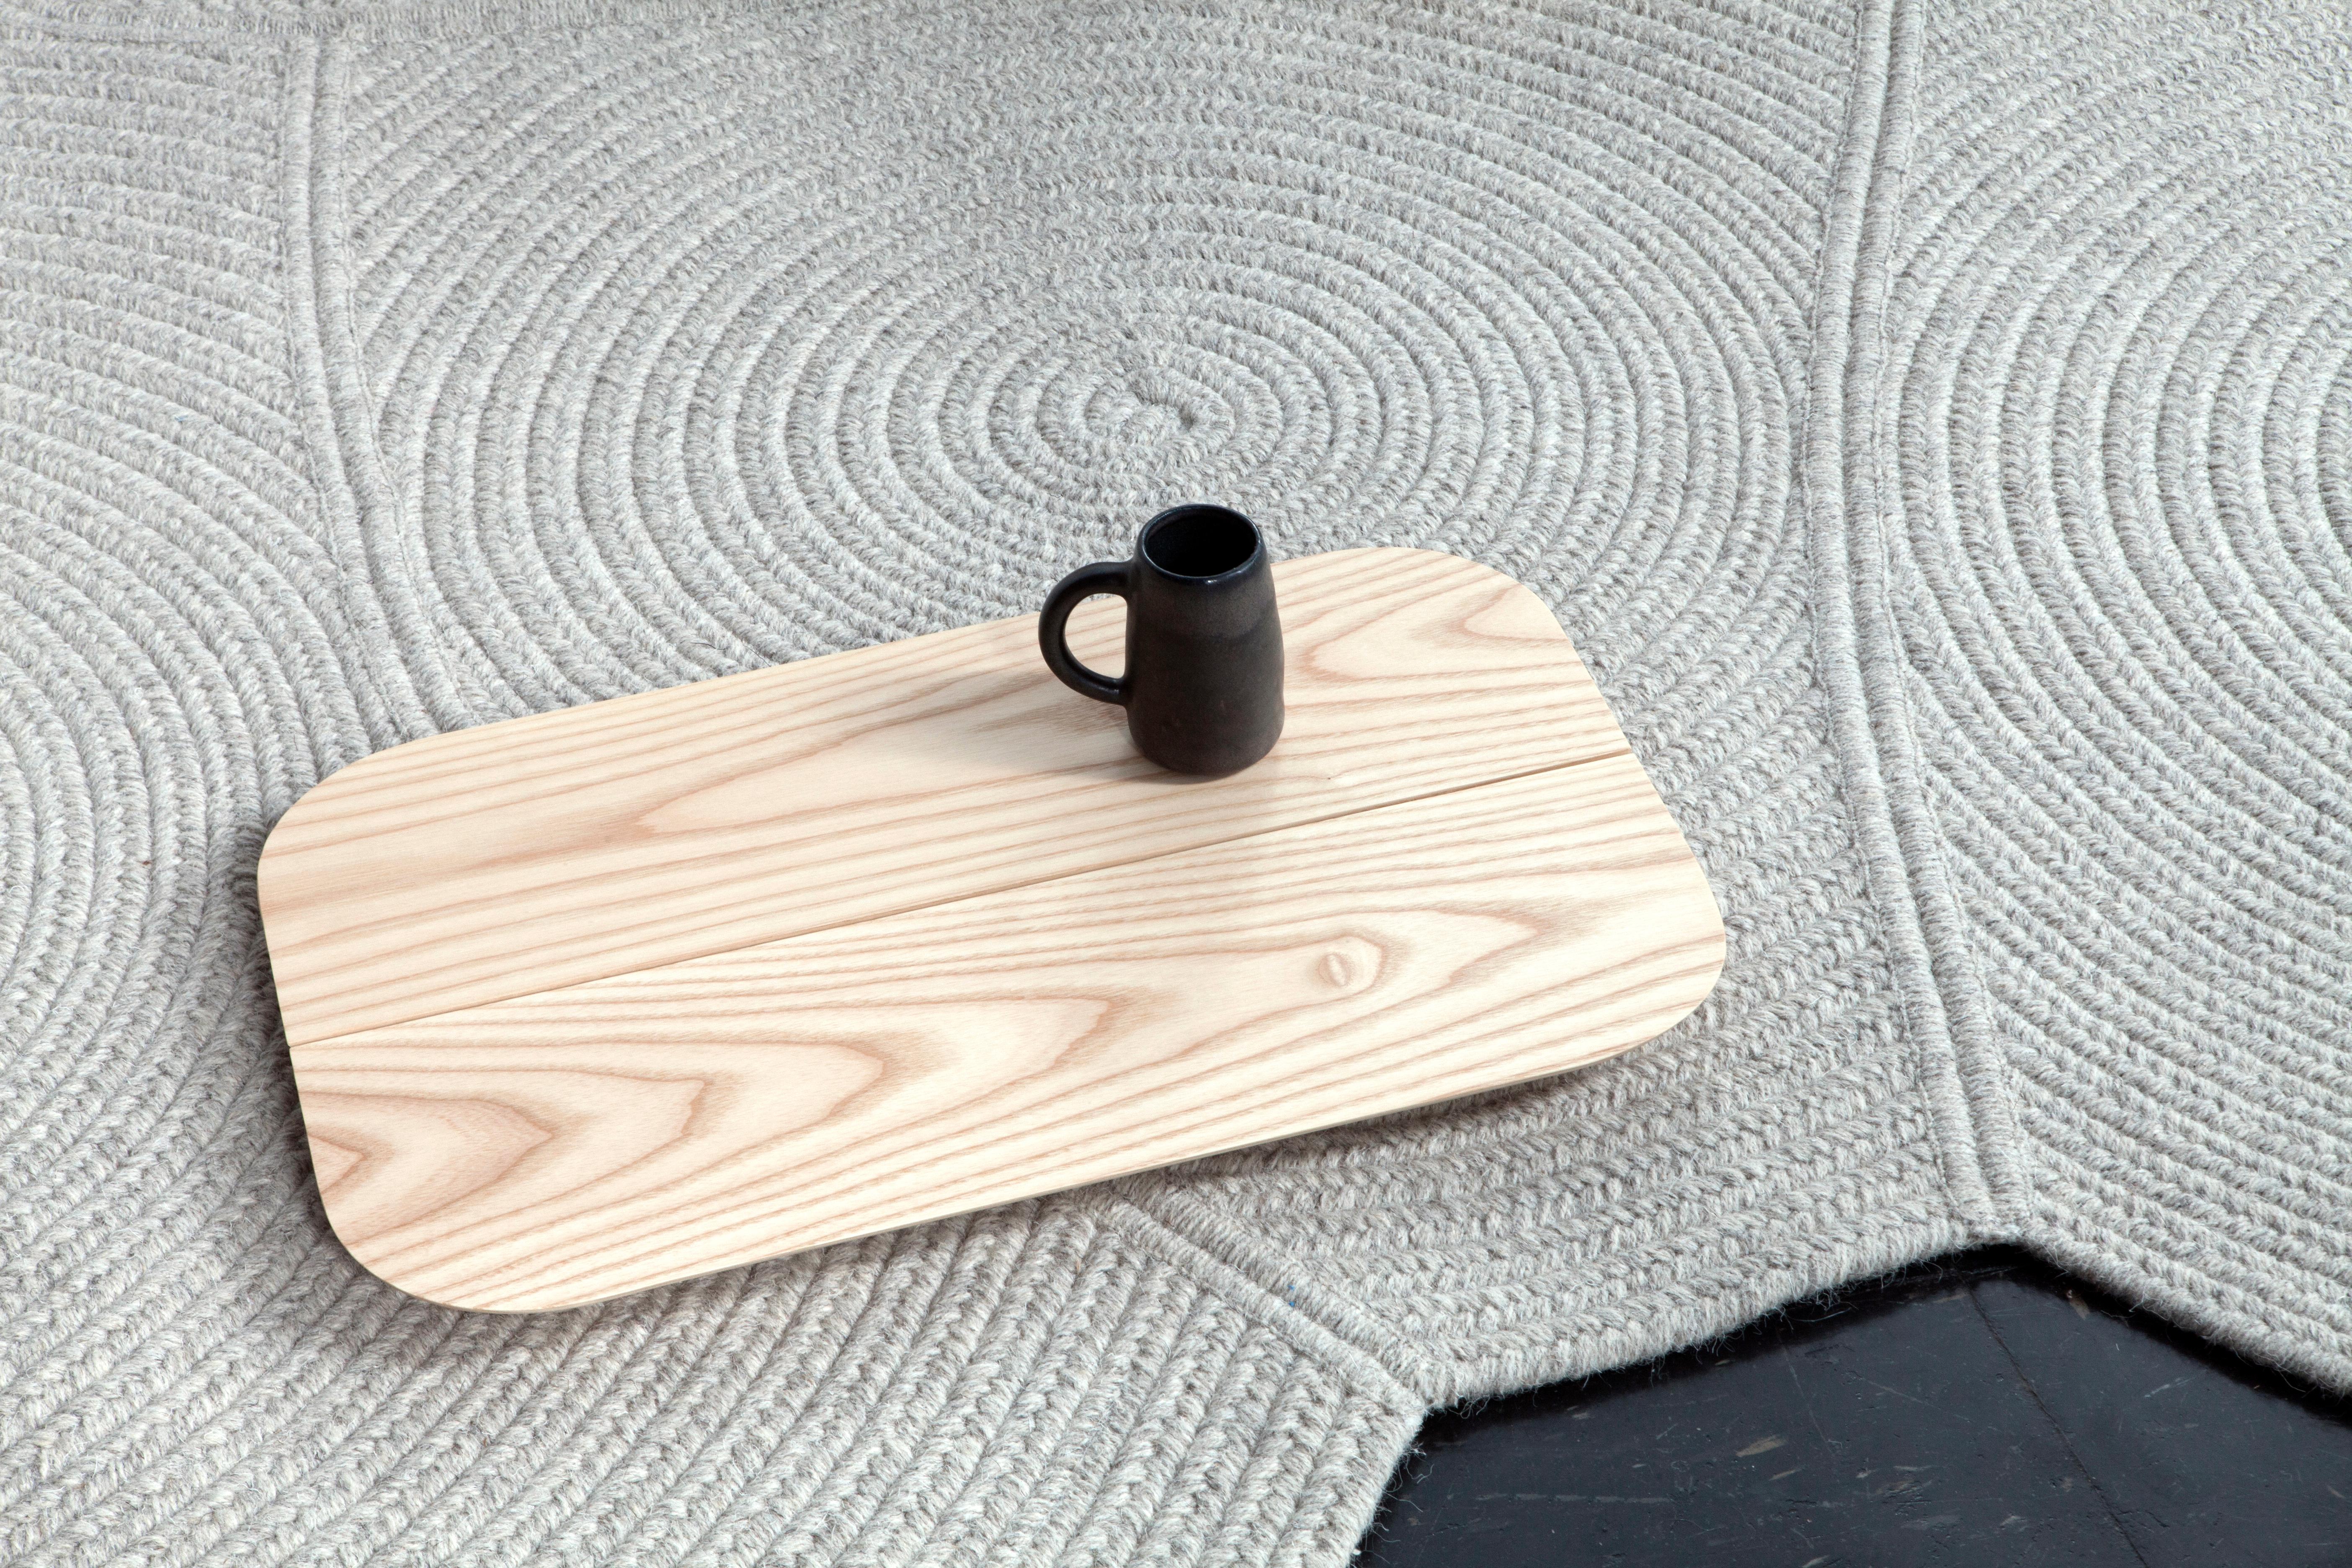 A beautifully simple and sturdy tray made in our studio from sustainably sourced ash. Use to serve food and drinks or as a low pedestal to display objects.

Dimensions:
Height 1.25 in / 3 cm
Width 20 in / 51 cm
Depth 12 in / 30.5